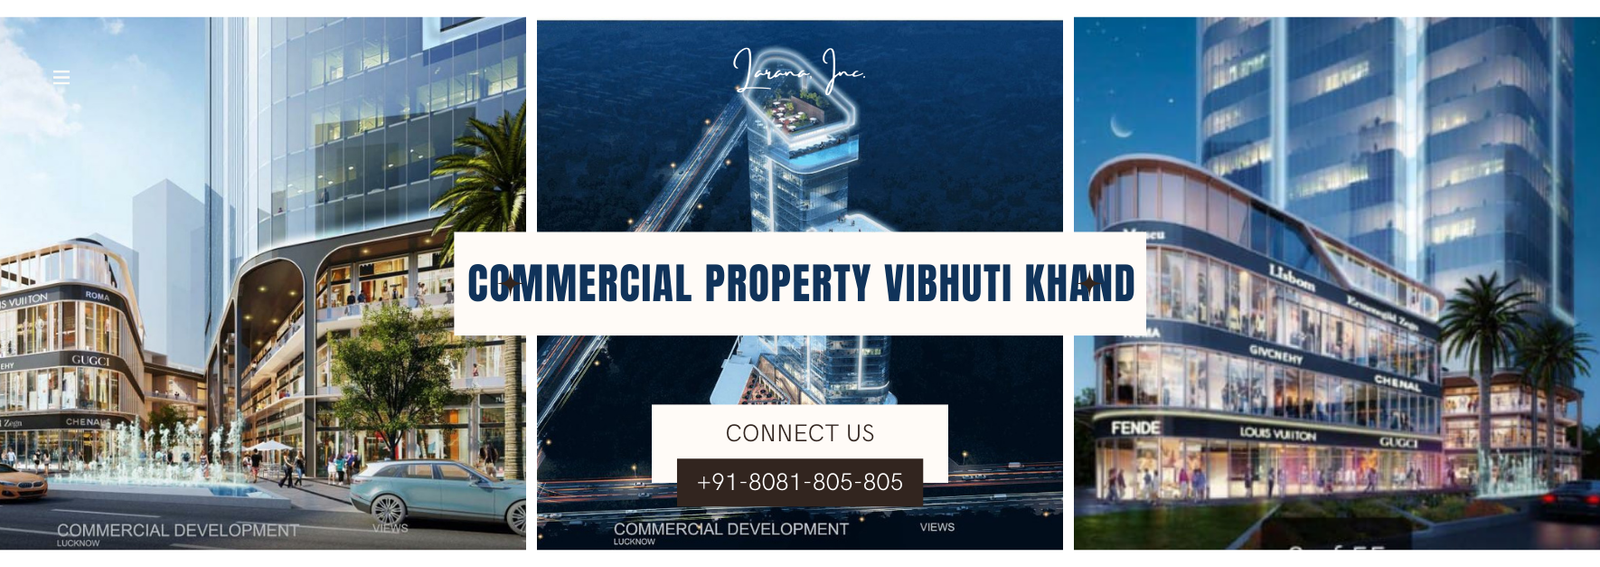 Commercial shops in vibhuti khand for sale